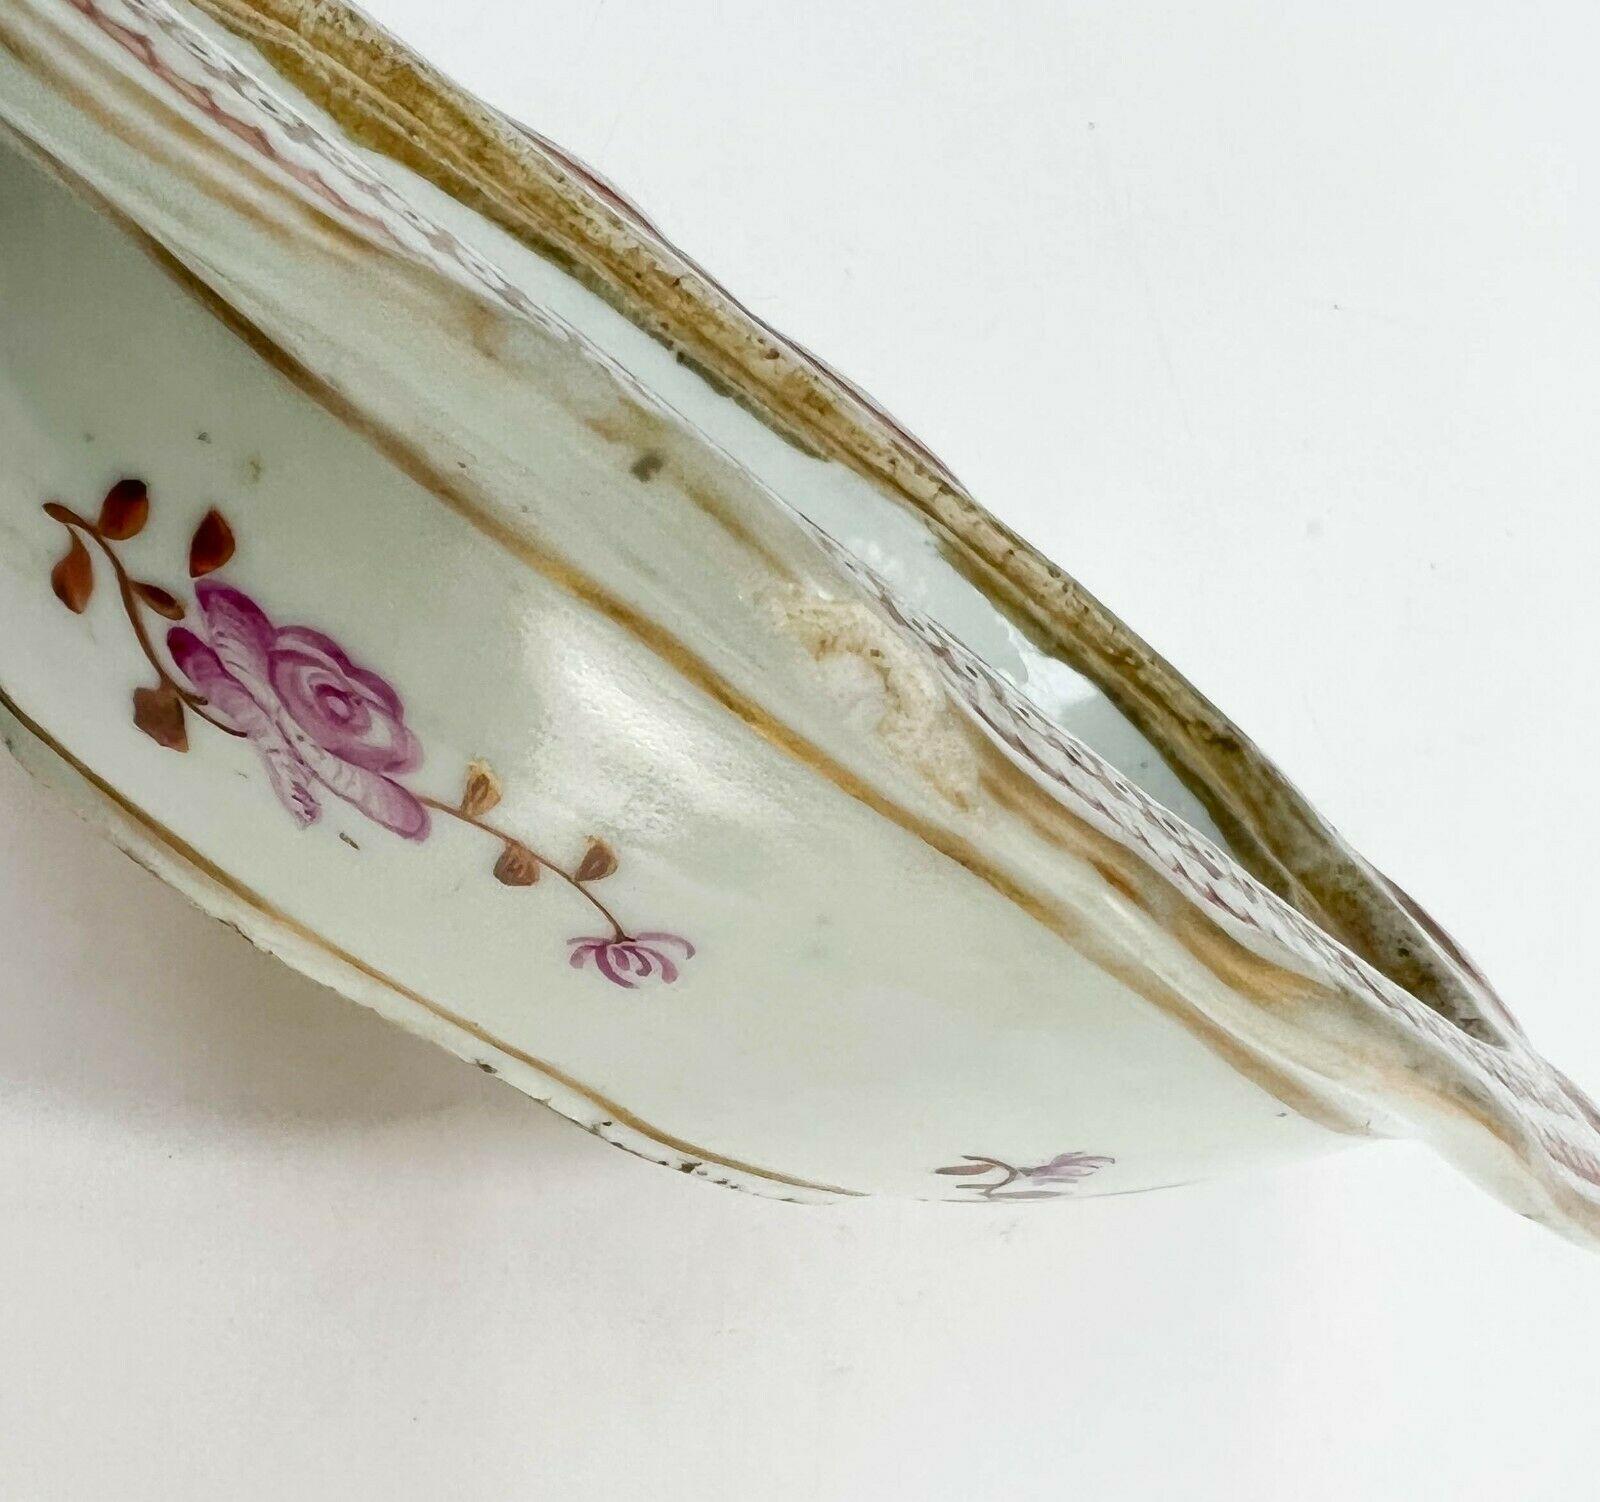 Chinese Export Porcelain Covered Serving Bowl, American Eagles, C1820 In Good Condition For Sale In Gardena, CA